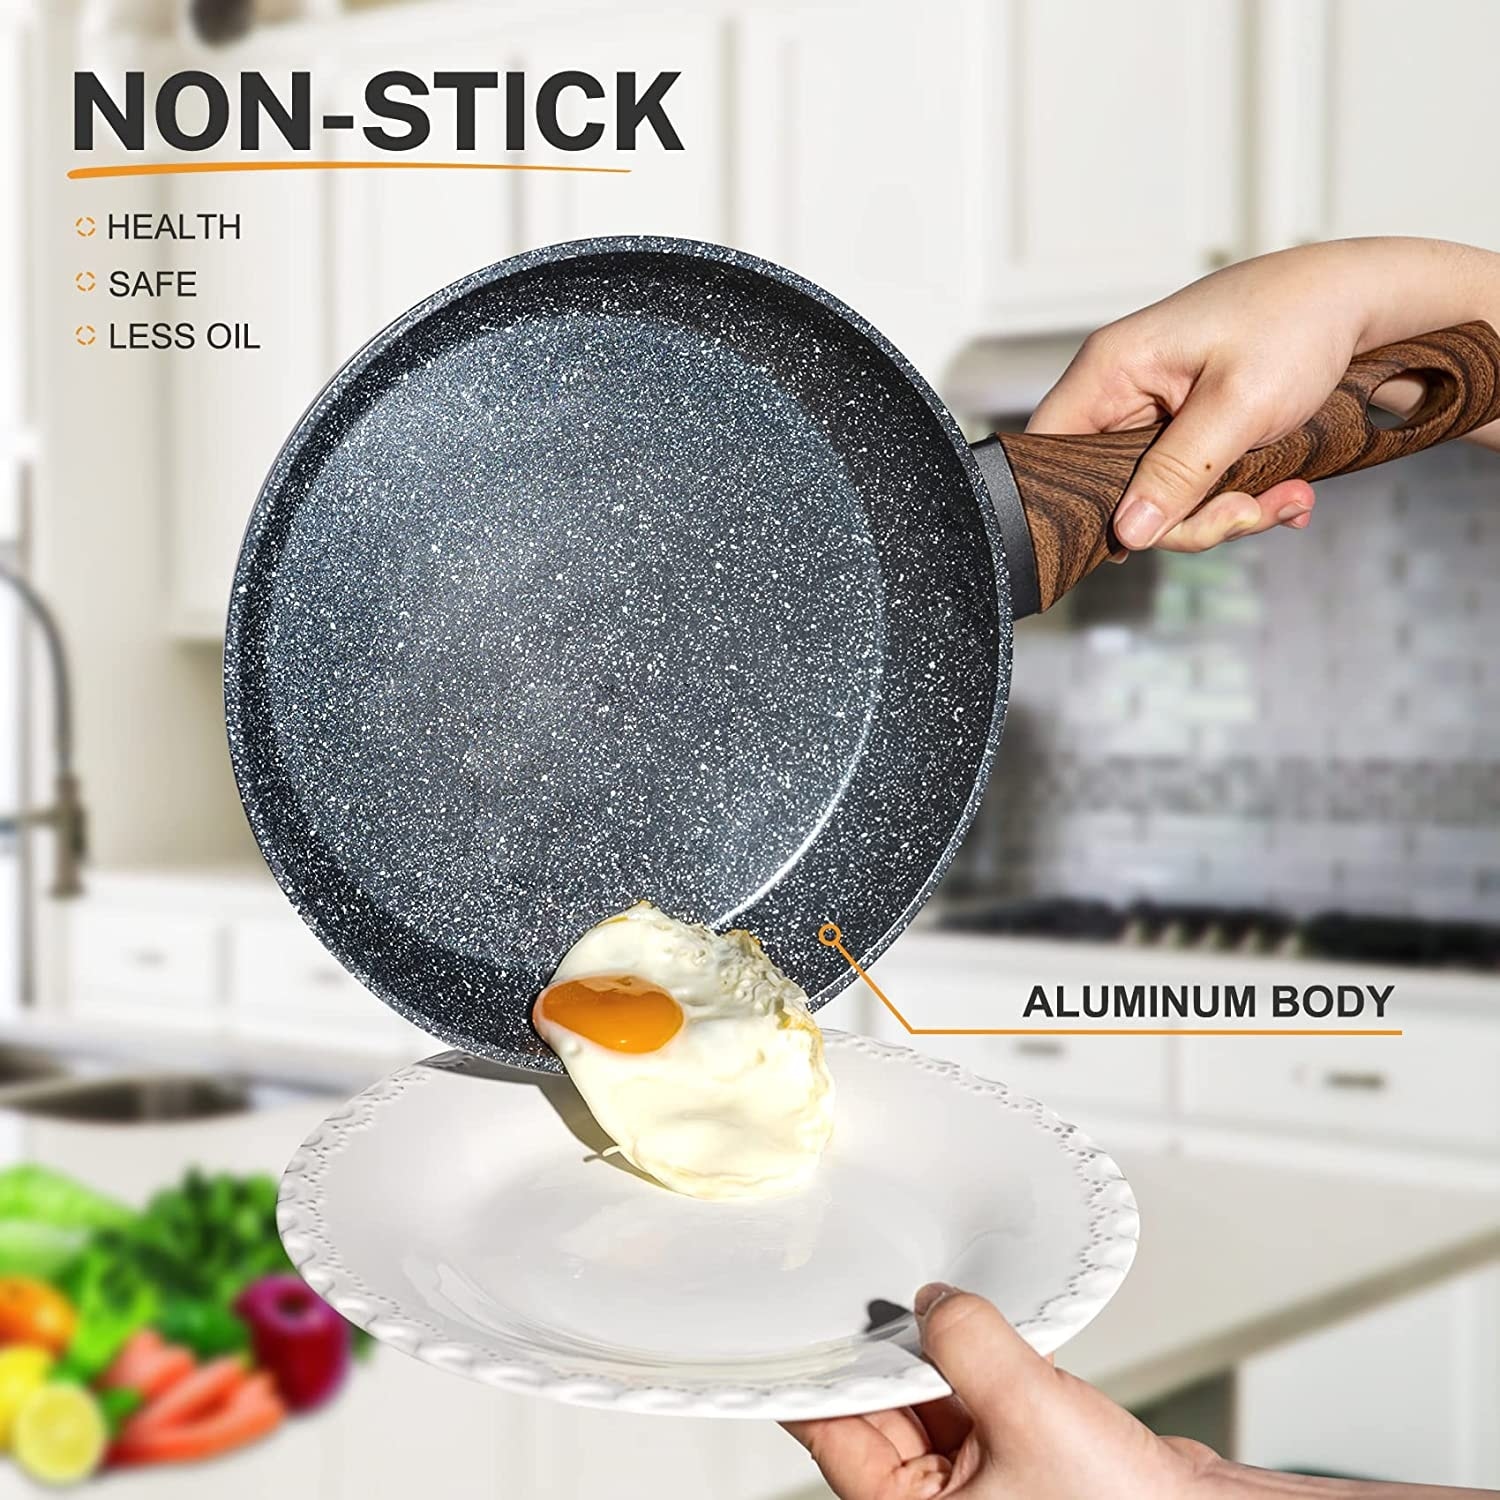 Pots and Pans Set Nonstick White Granite Induction Cookware Sets - On Sale  - Bed Bath & Beyond - 37508822